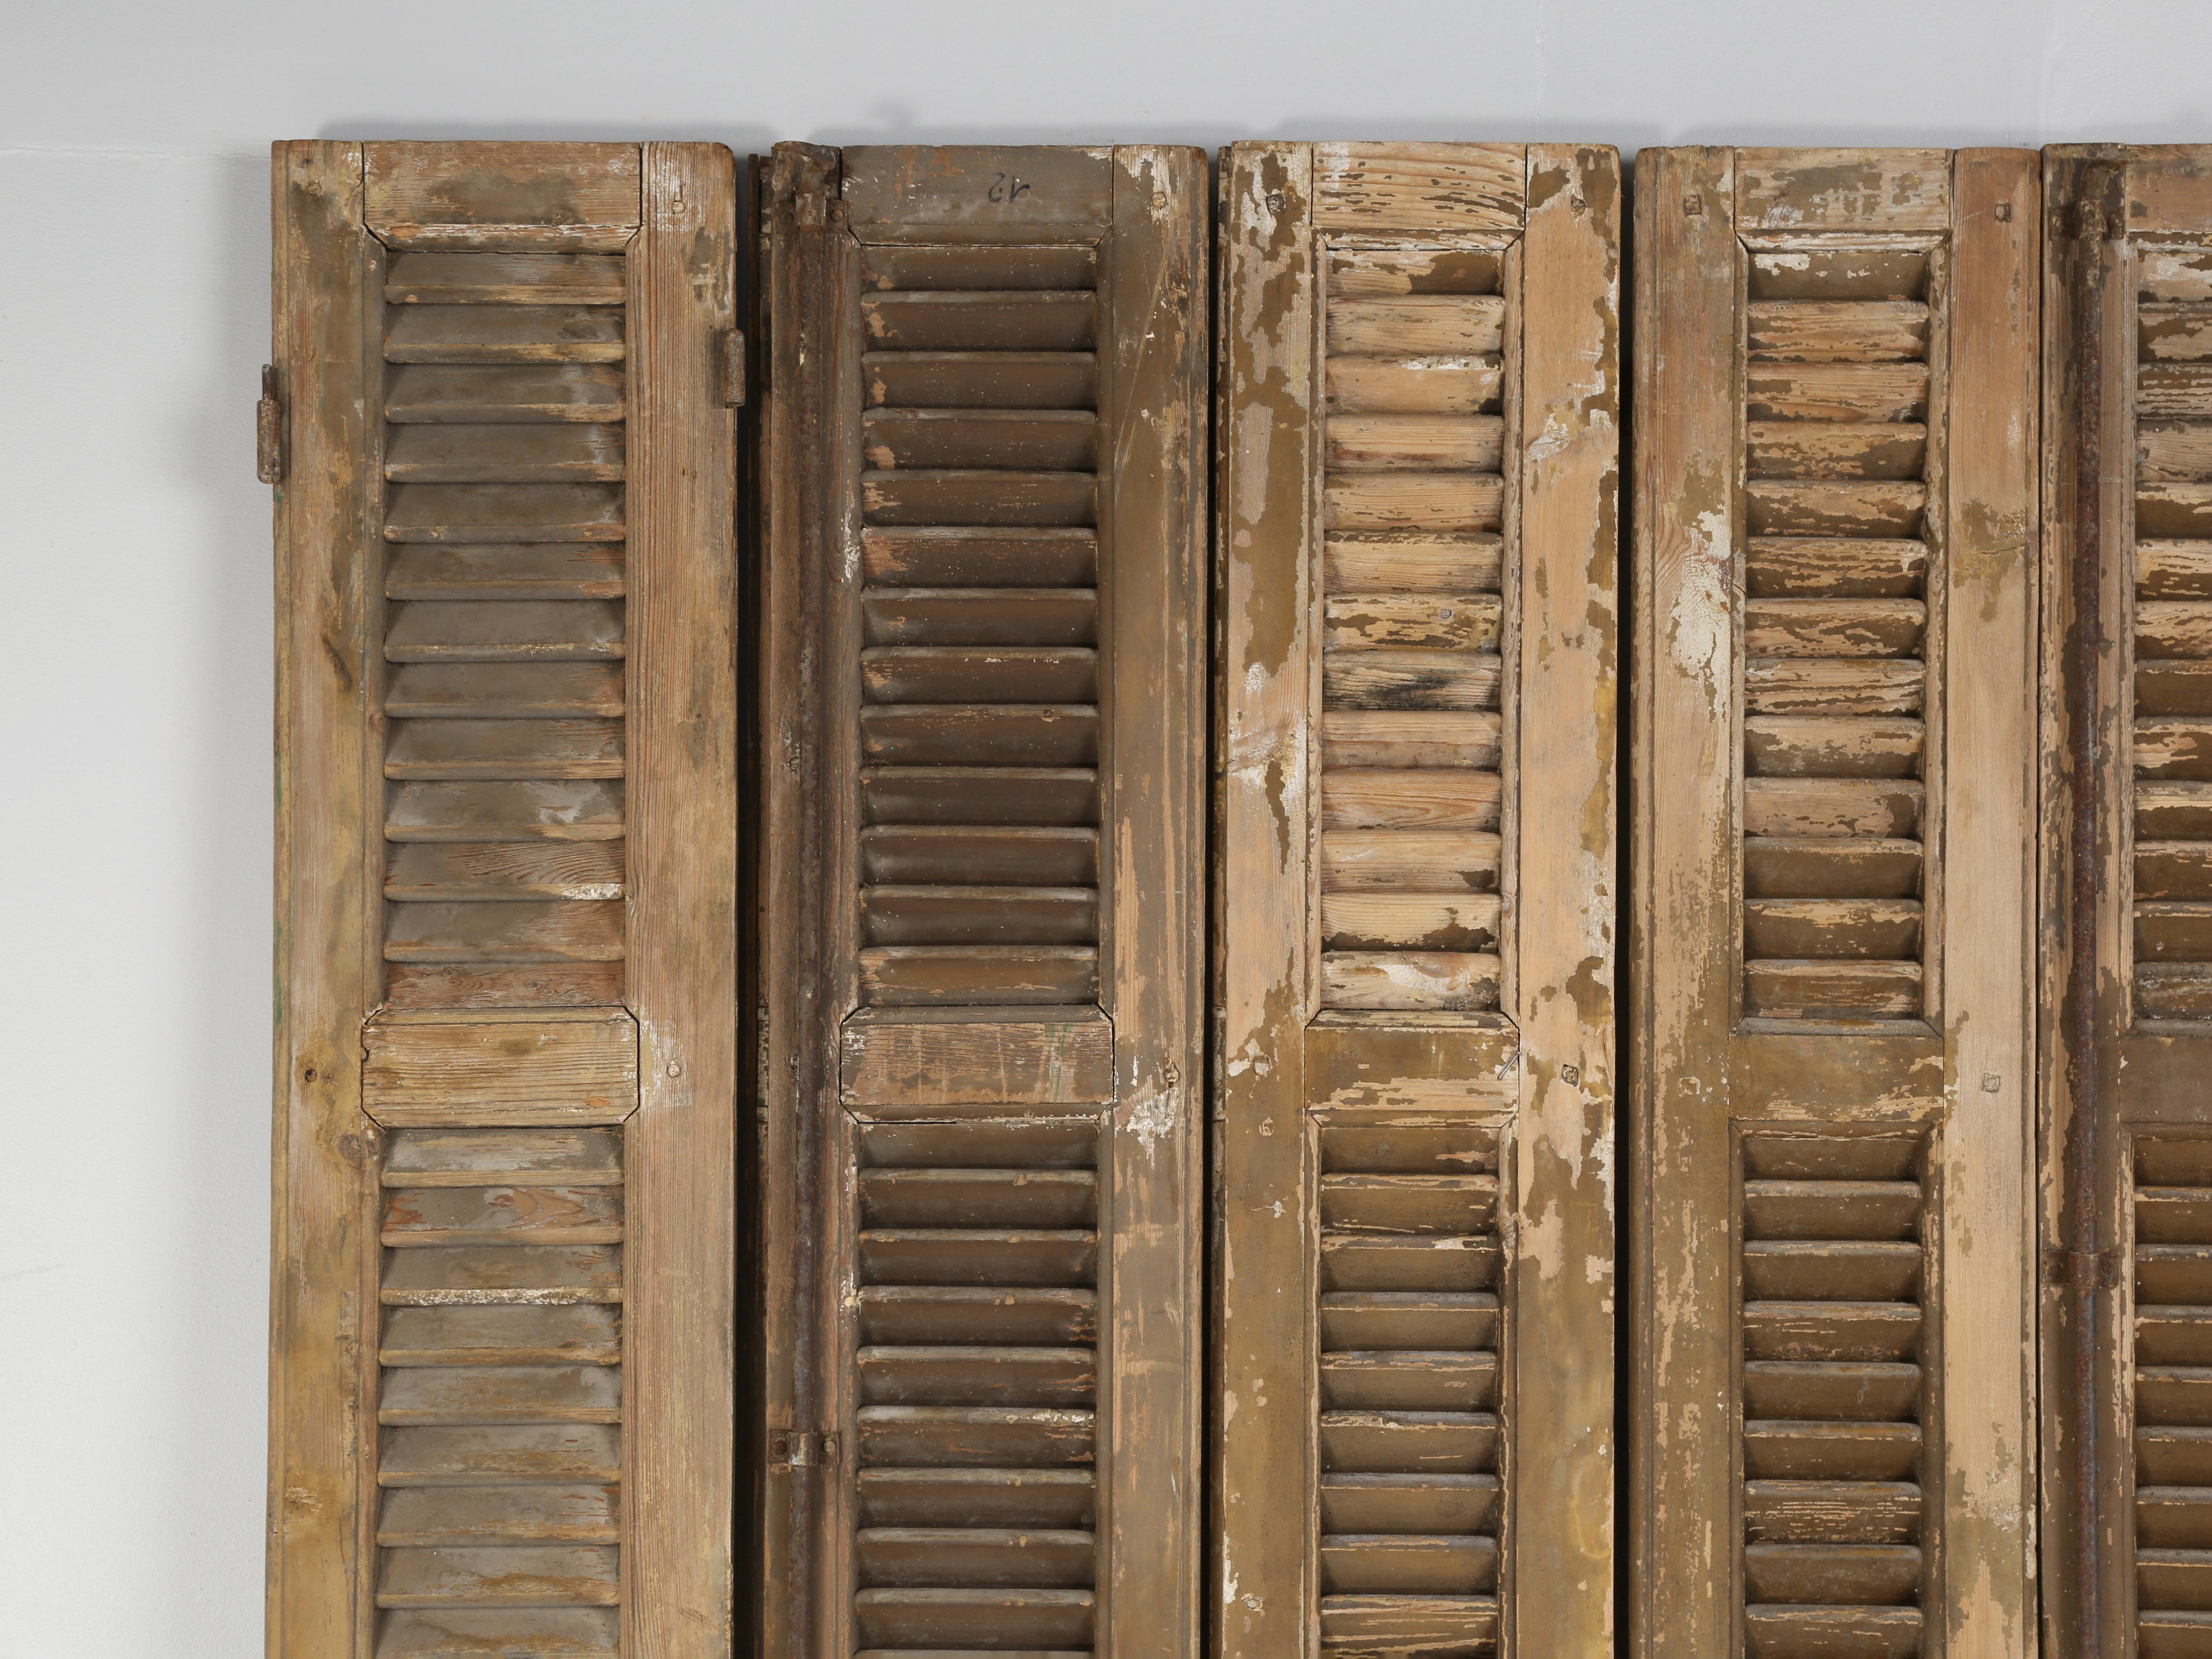 Set of (8) antique shutters removed from a French chateau located in the Brittany region of France. The shutters remain in as found condition and could be used to make a headboard or room divider. They have been in a dry heated warehouse for the